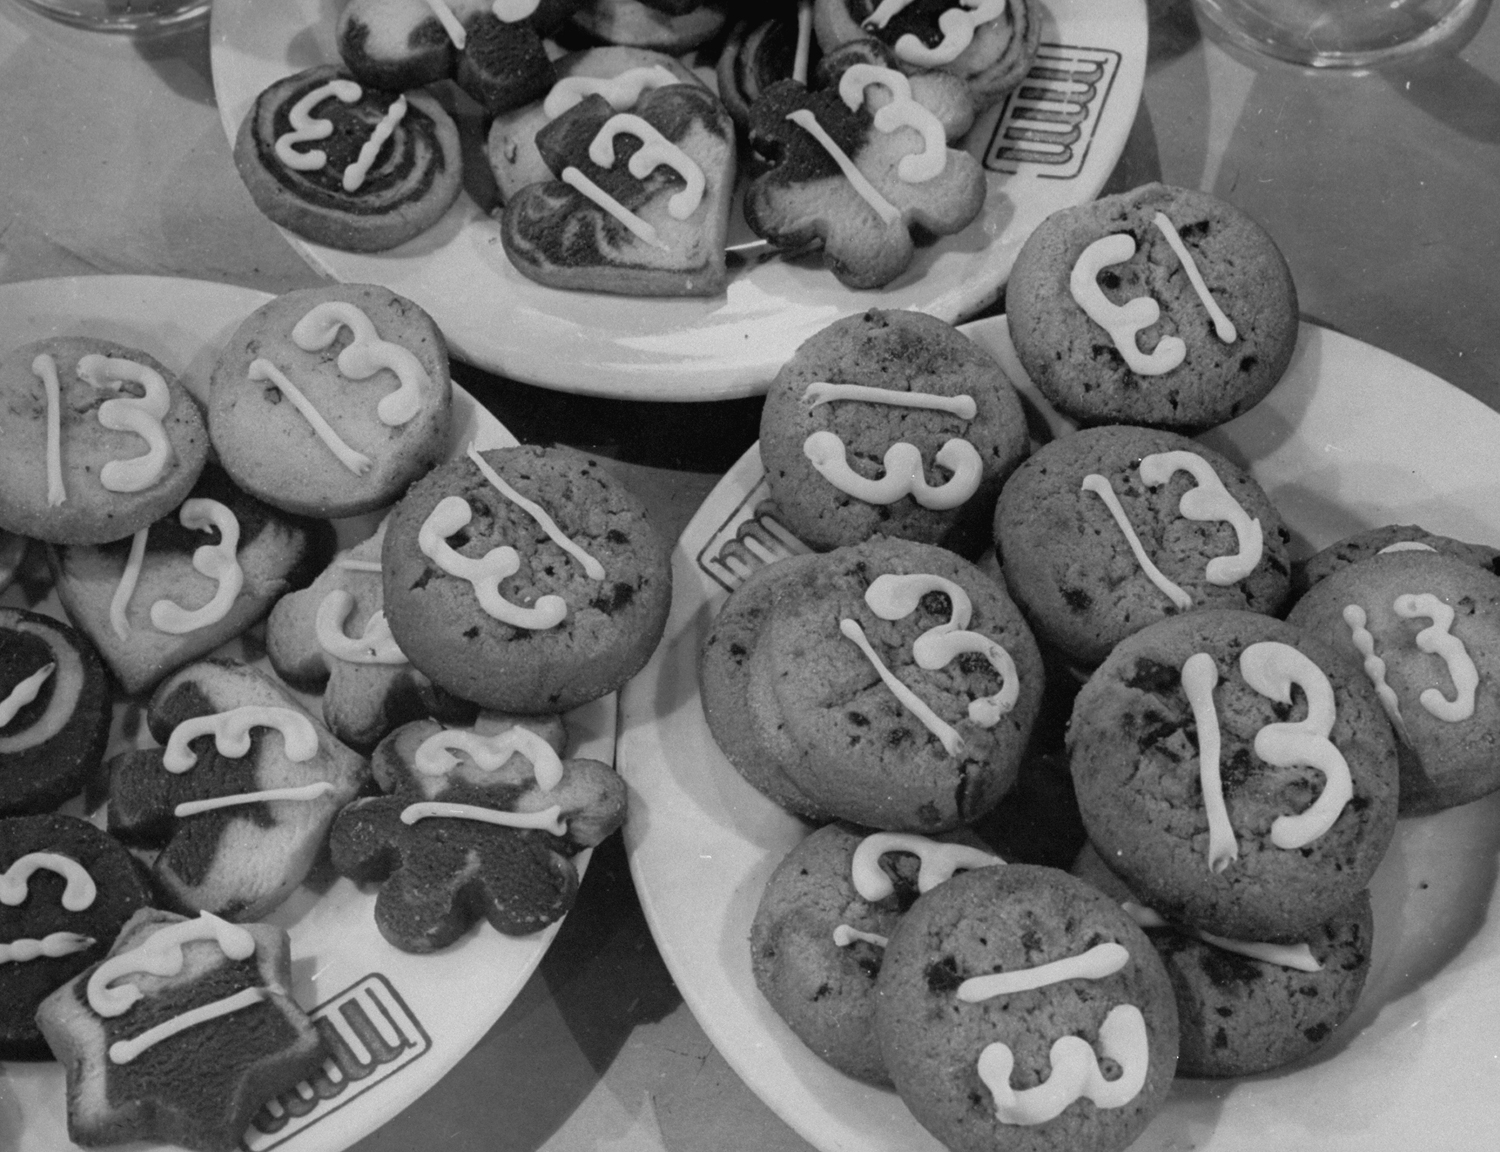 Cookies at the 13th Anniversary Jinx-Jabbing Jamboree and Dinner of the Anti-Superstition Society of Chicago, 1940.